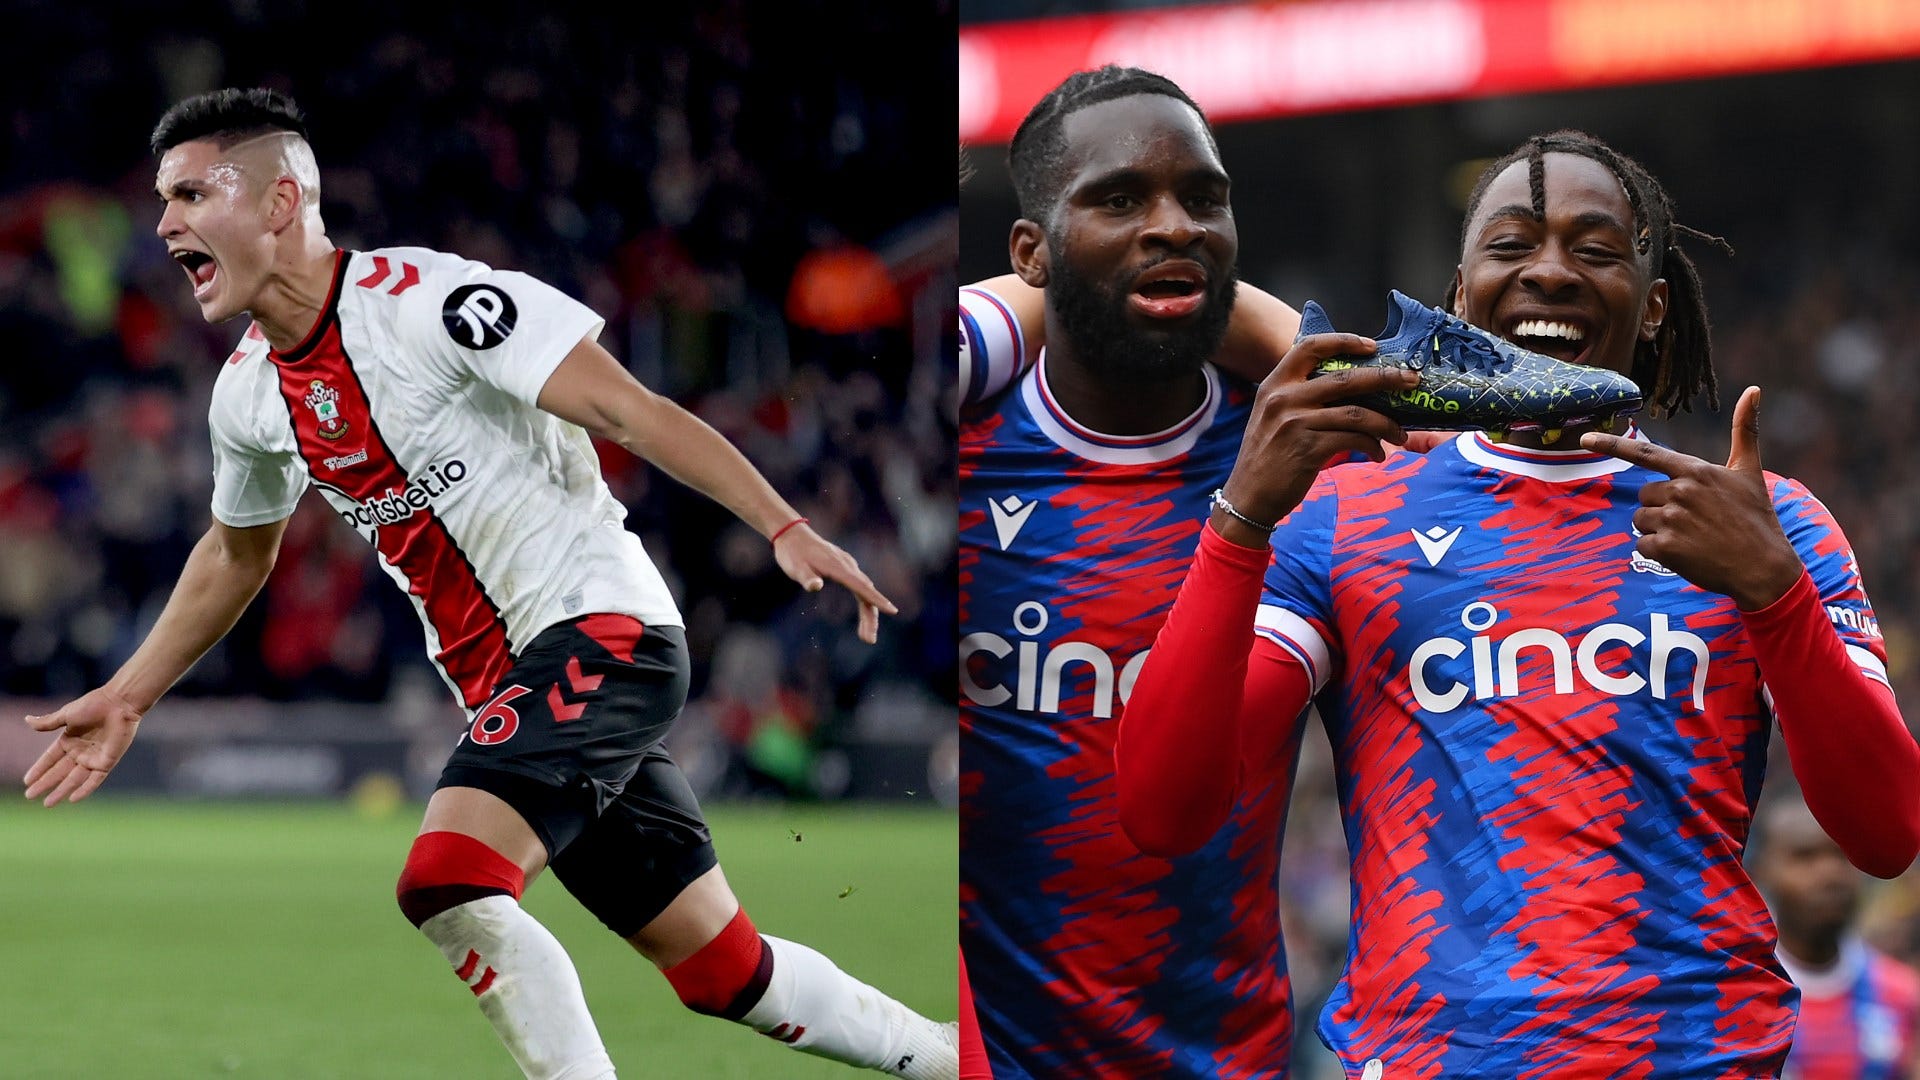 Southampton vs Crystal Palace Where to watch the match online, live stream, TV channels and kick-off time Goal US